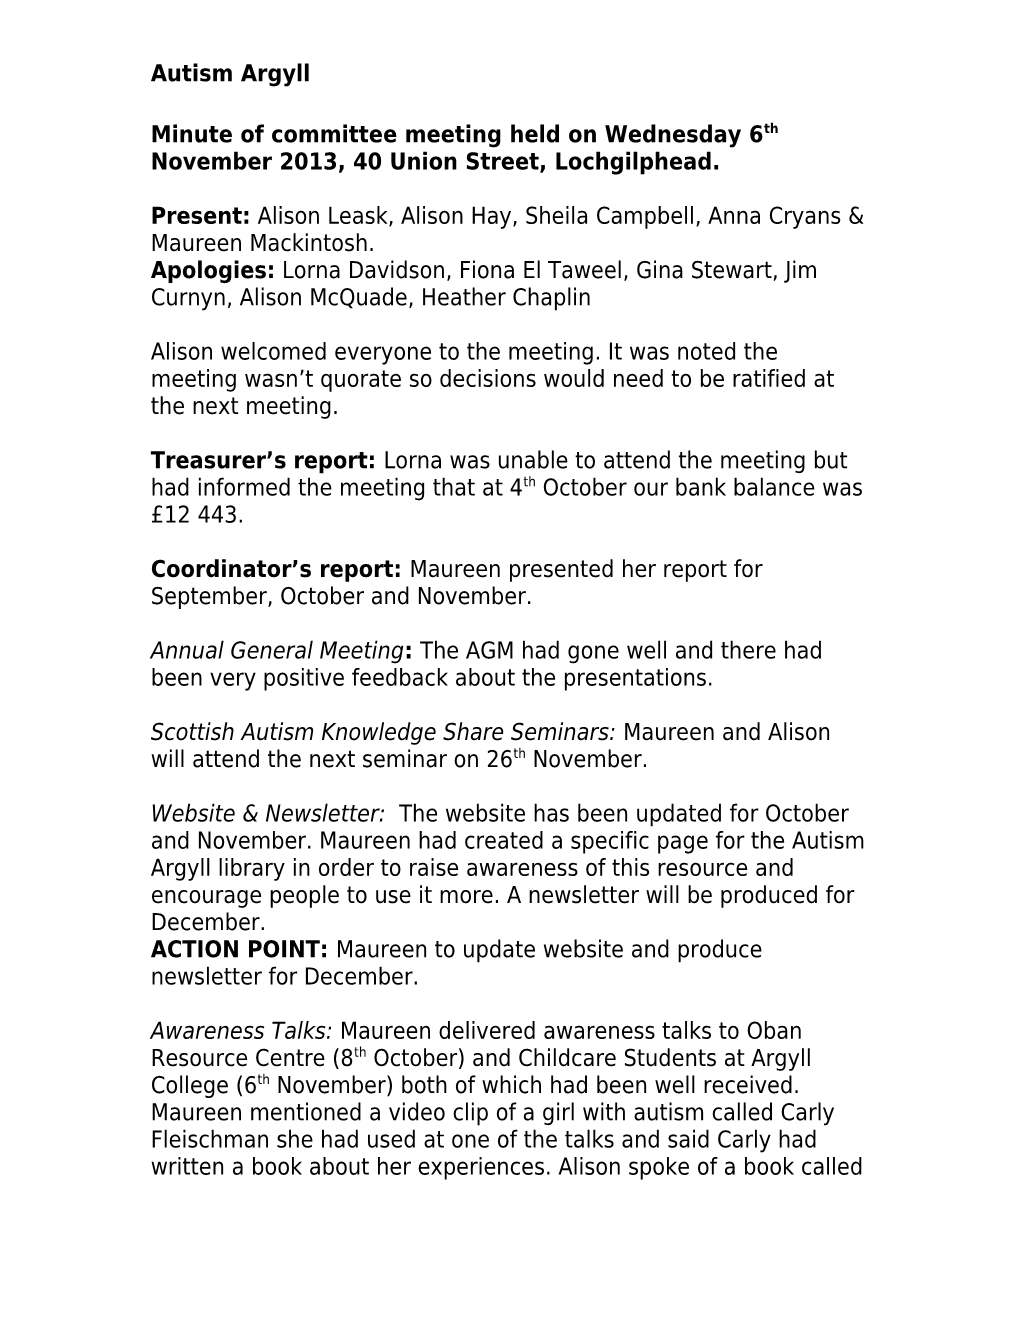 Minute of Committee Meeting Held on Wednesday 6Th November 2013, 40 Union Street, Lochgilphead